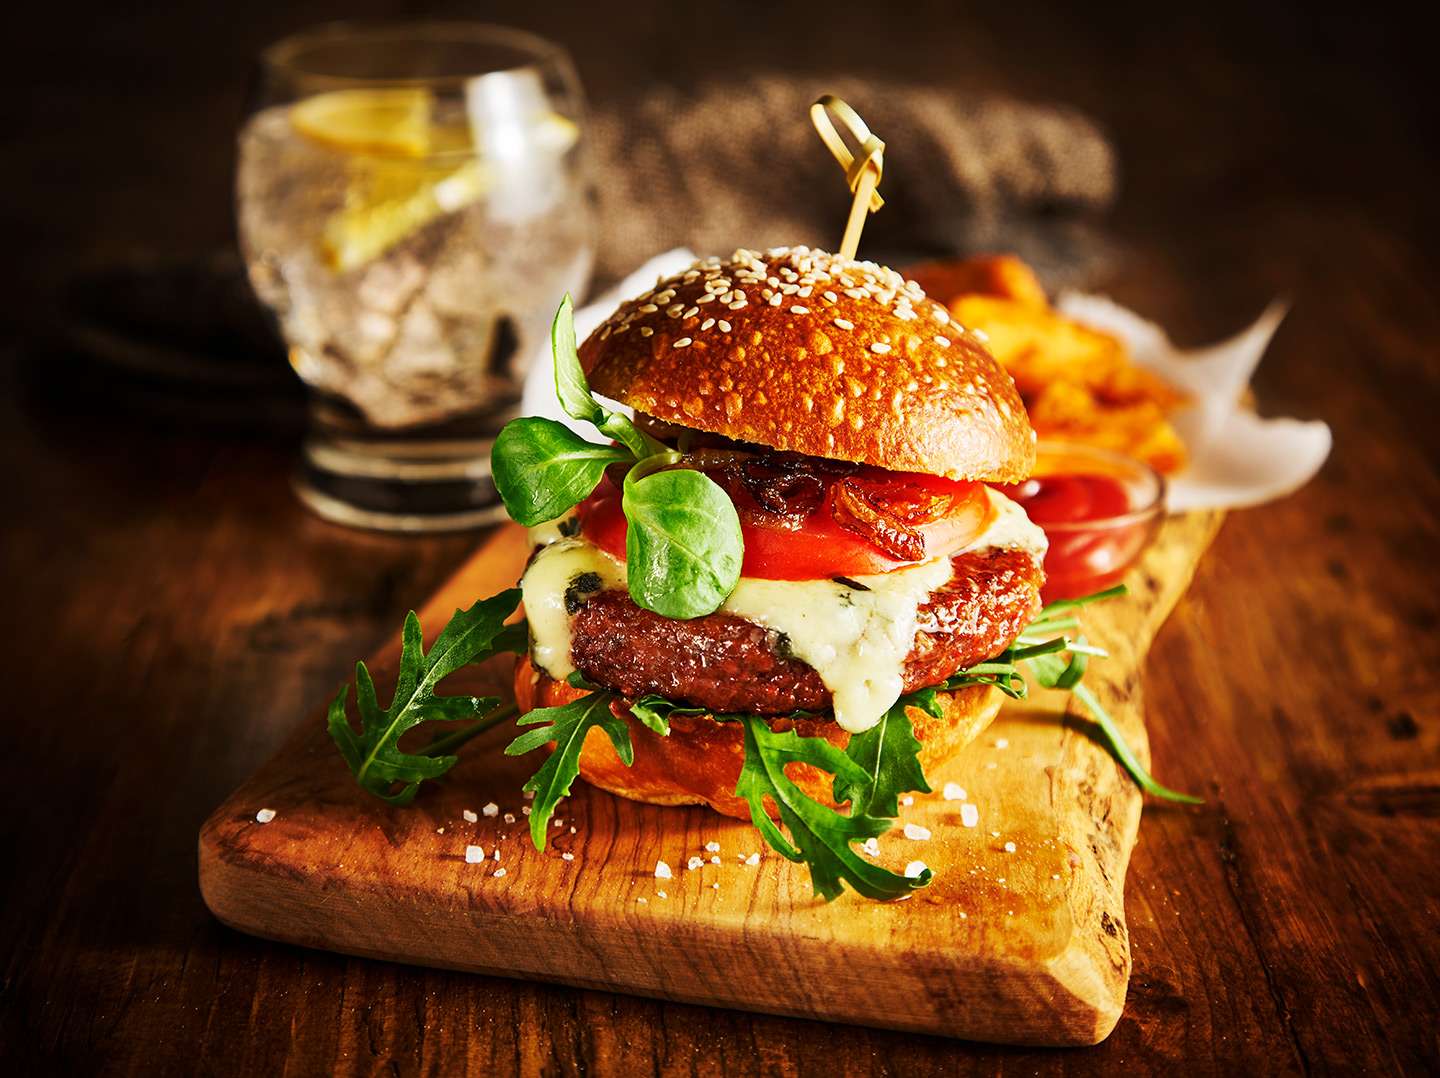 Gourmet Vegan burger by Food photography by Food Photographer London Michael Michaels